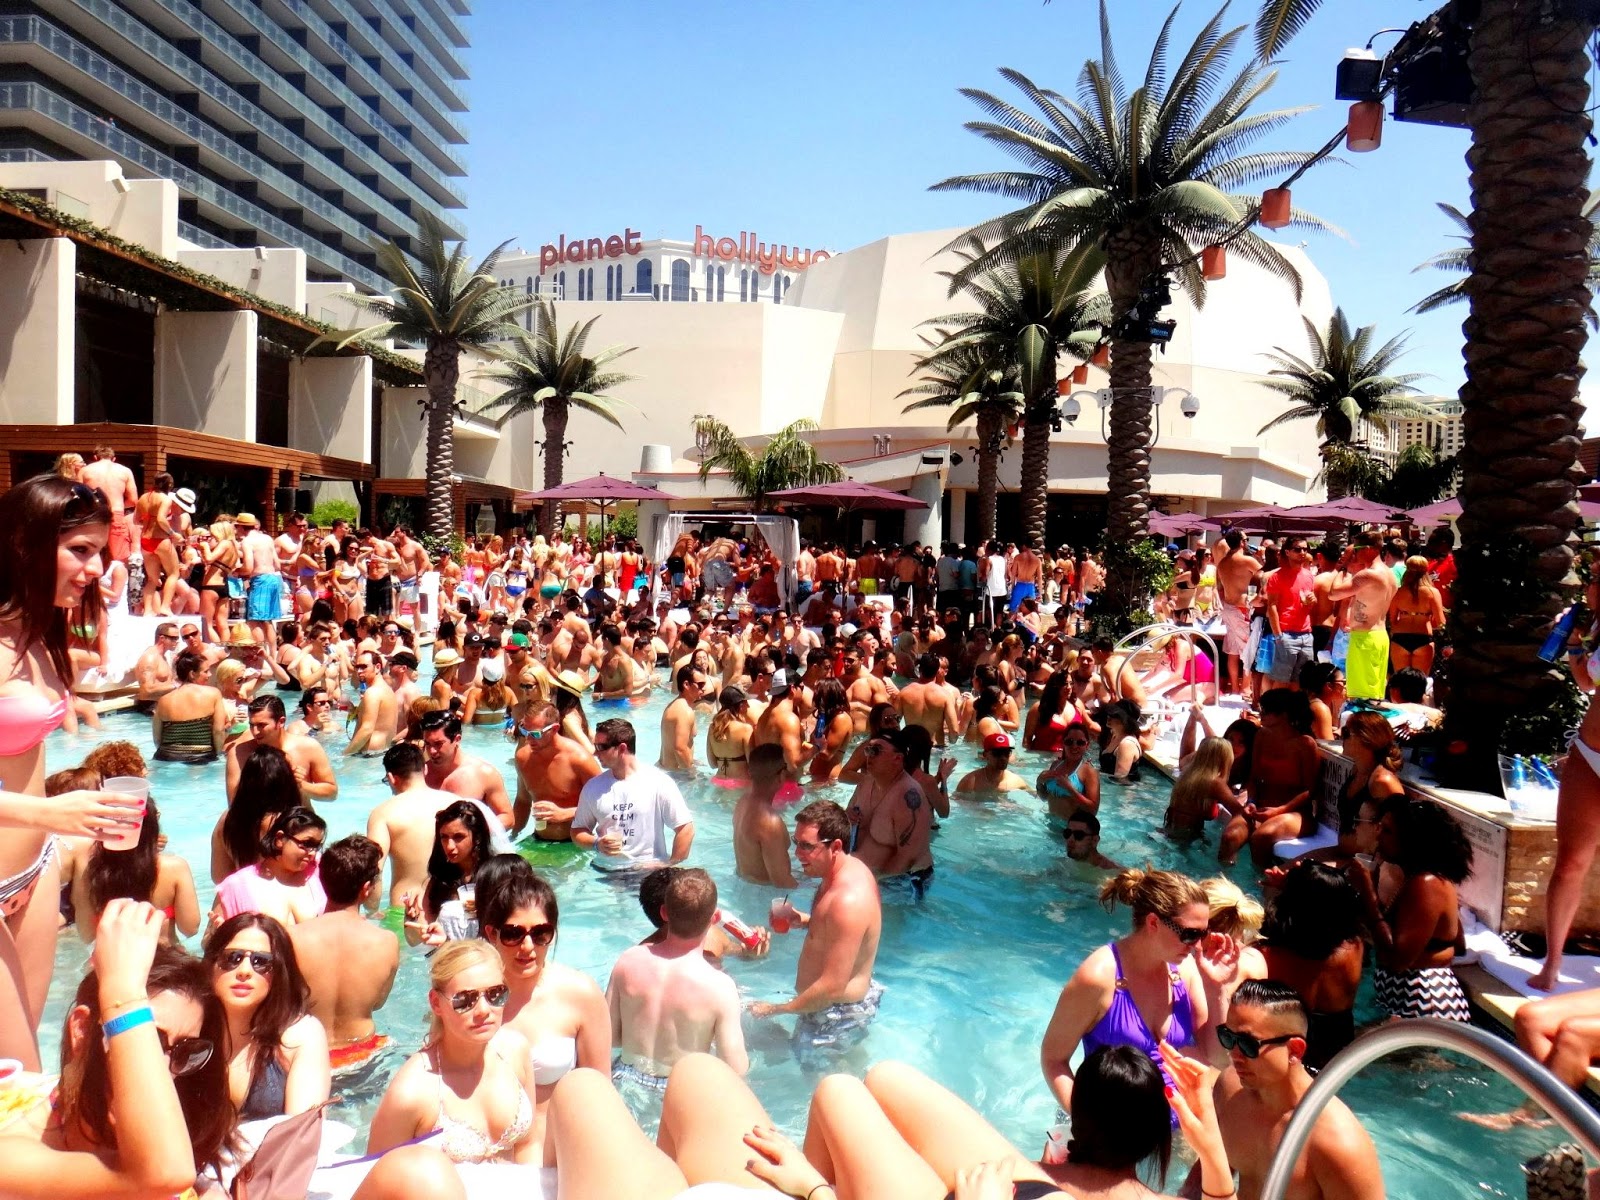 Vegas Pool Party Dress Code: Do's and Don'ts